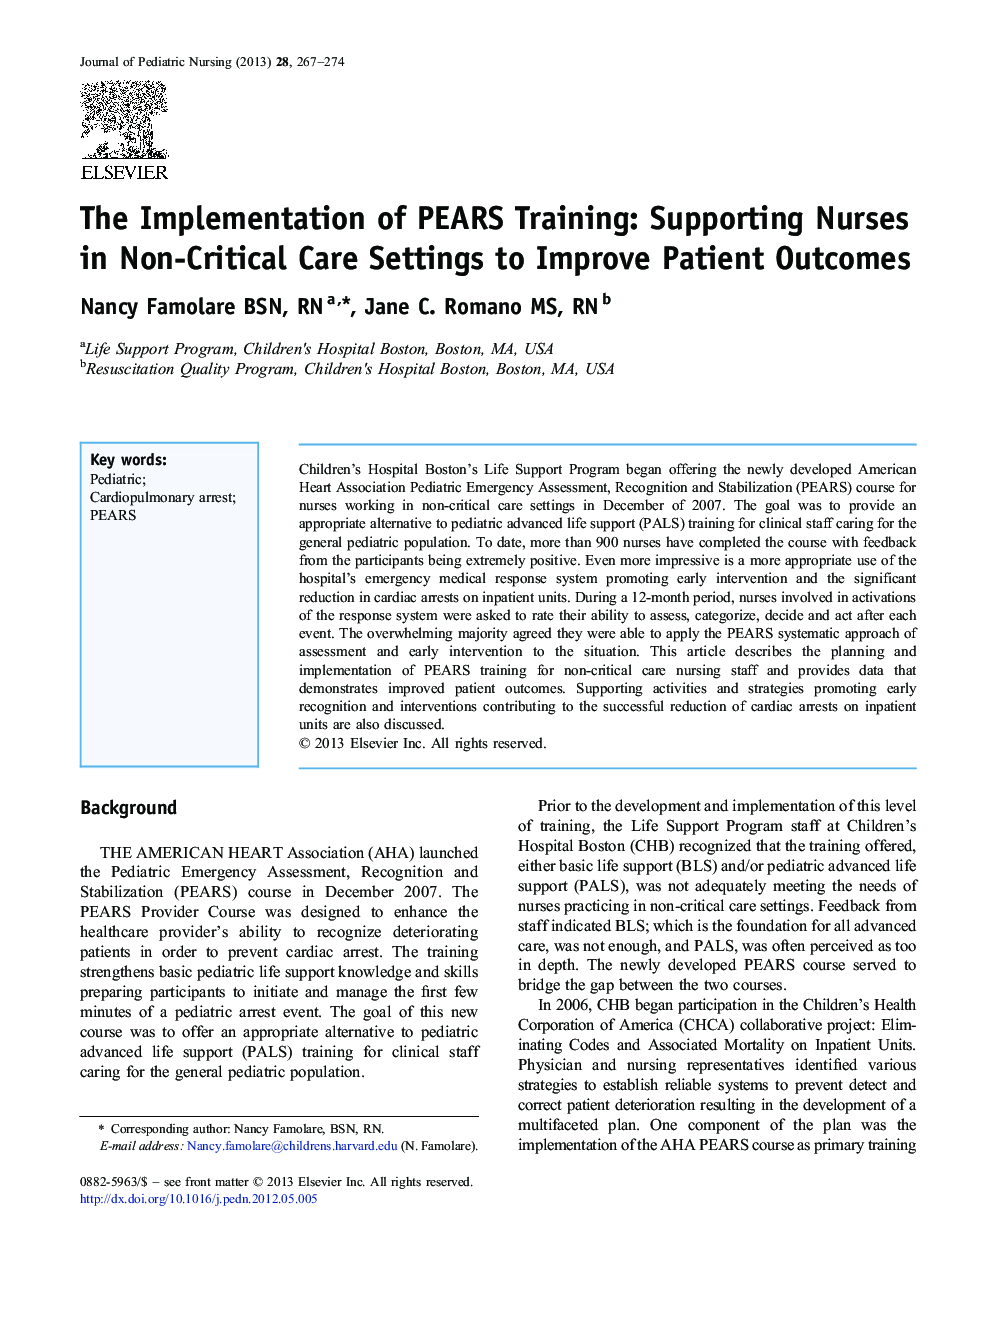 The Implementation of PEARS Training: Supporting Nurses in Non-Critical Care Settings to Improve Patient Outcomes